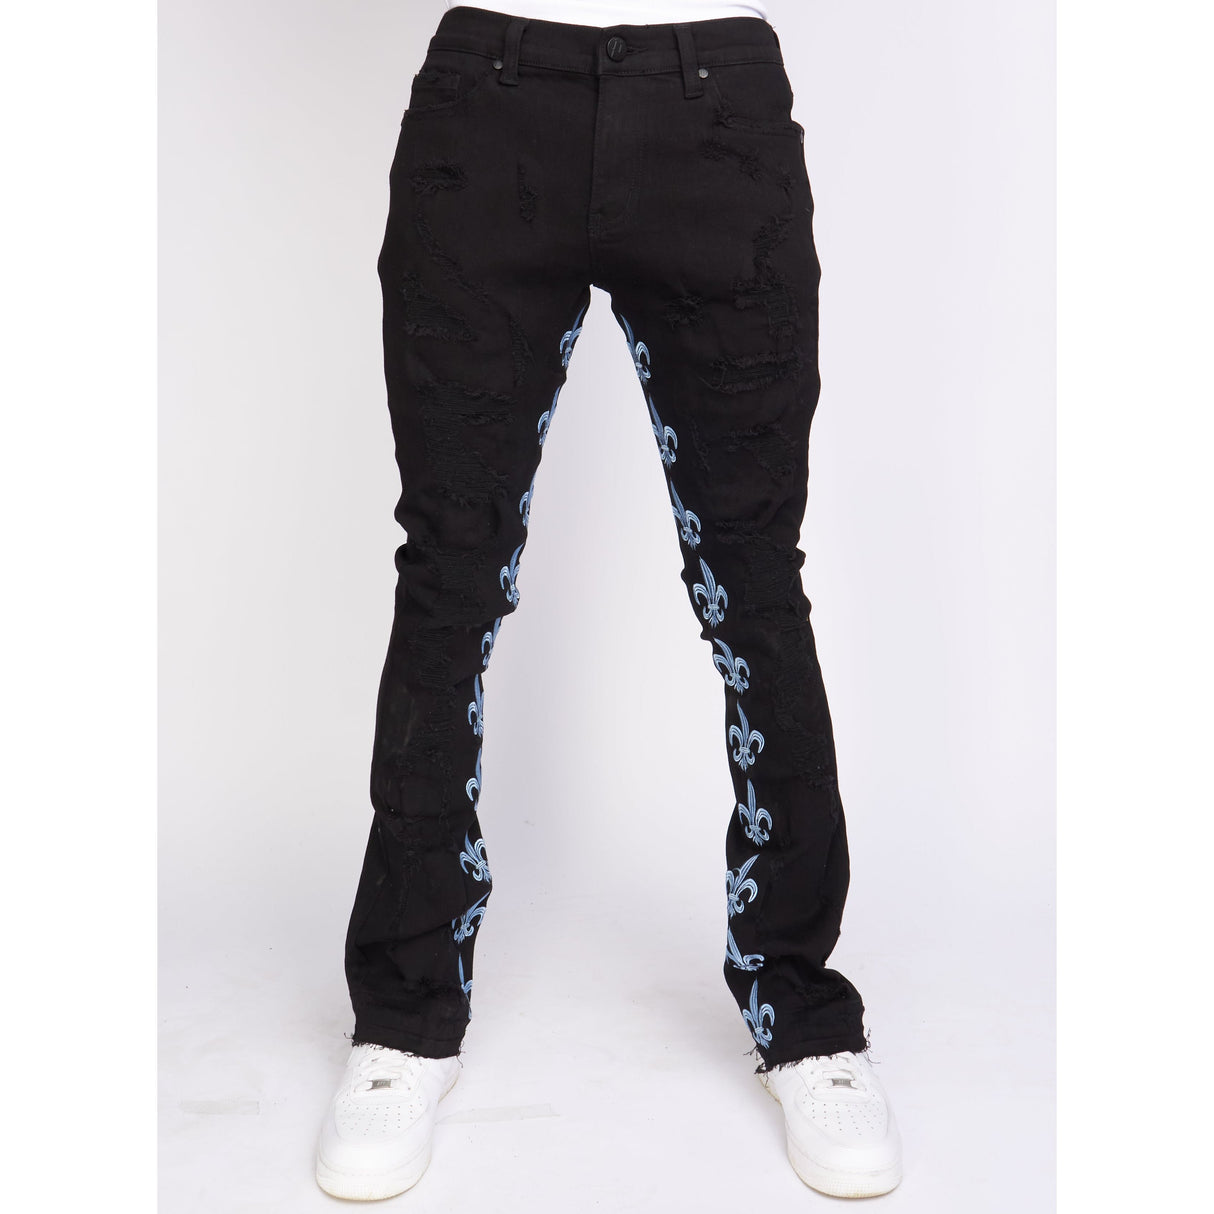 Politics Jeans - Stacked Embroidery - Black and Blue   - Barkley506